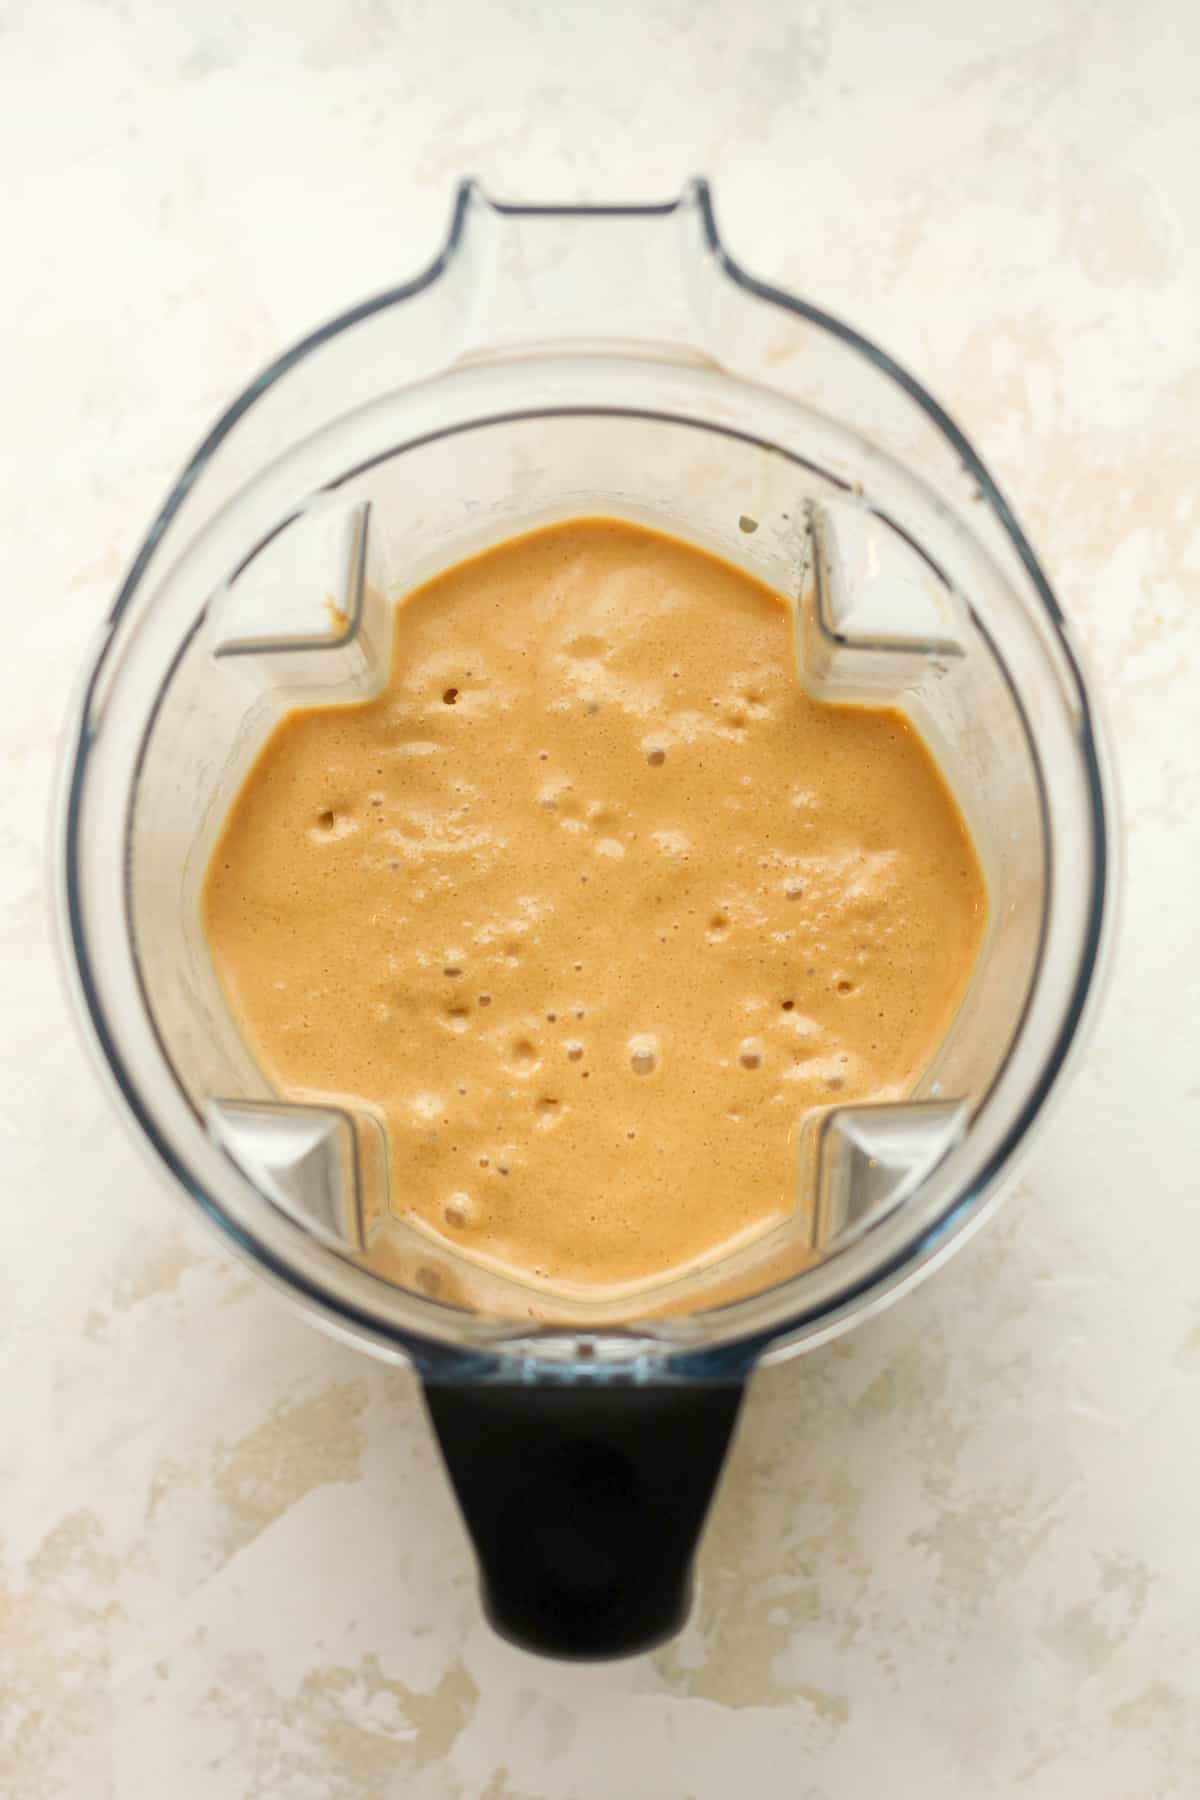 Overhead view of a blender of coffee smoothie.